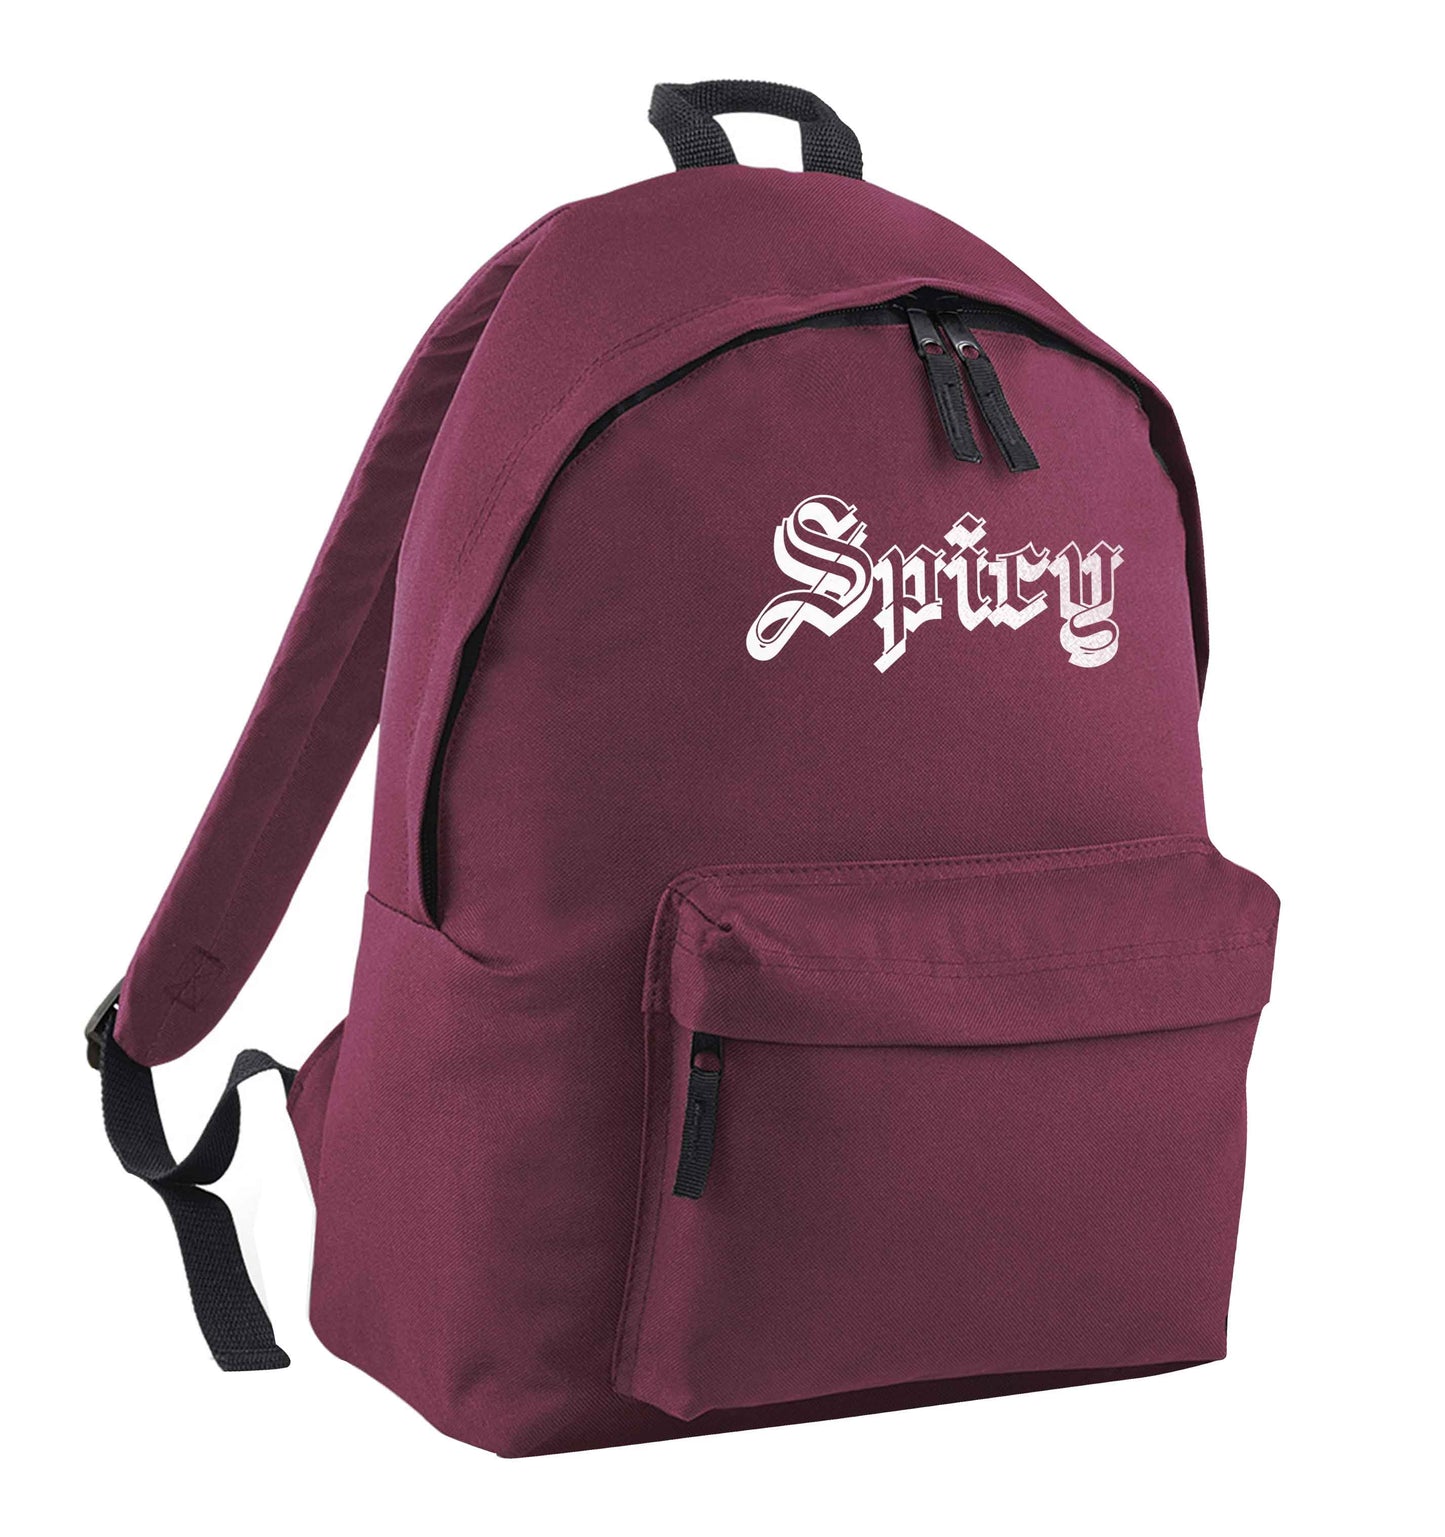 Spicy maroon adults backpack